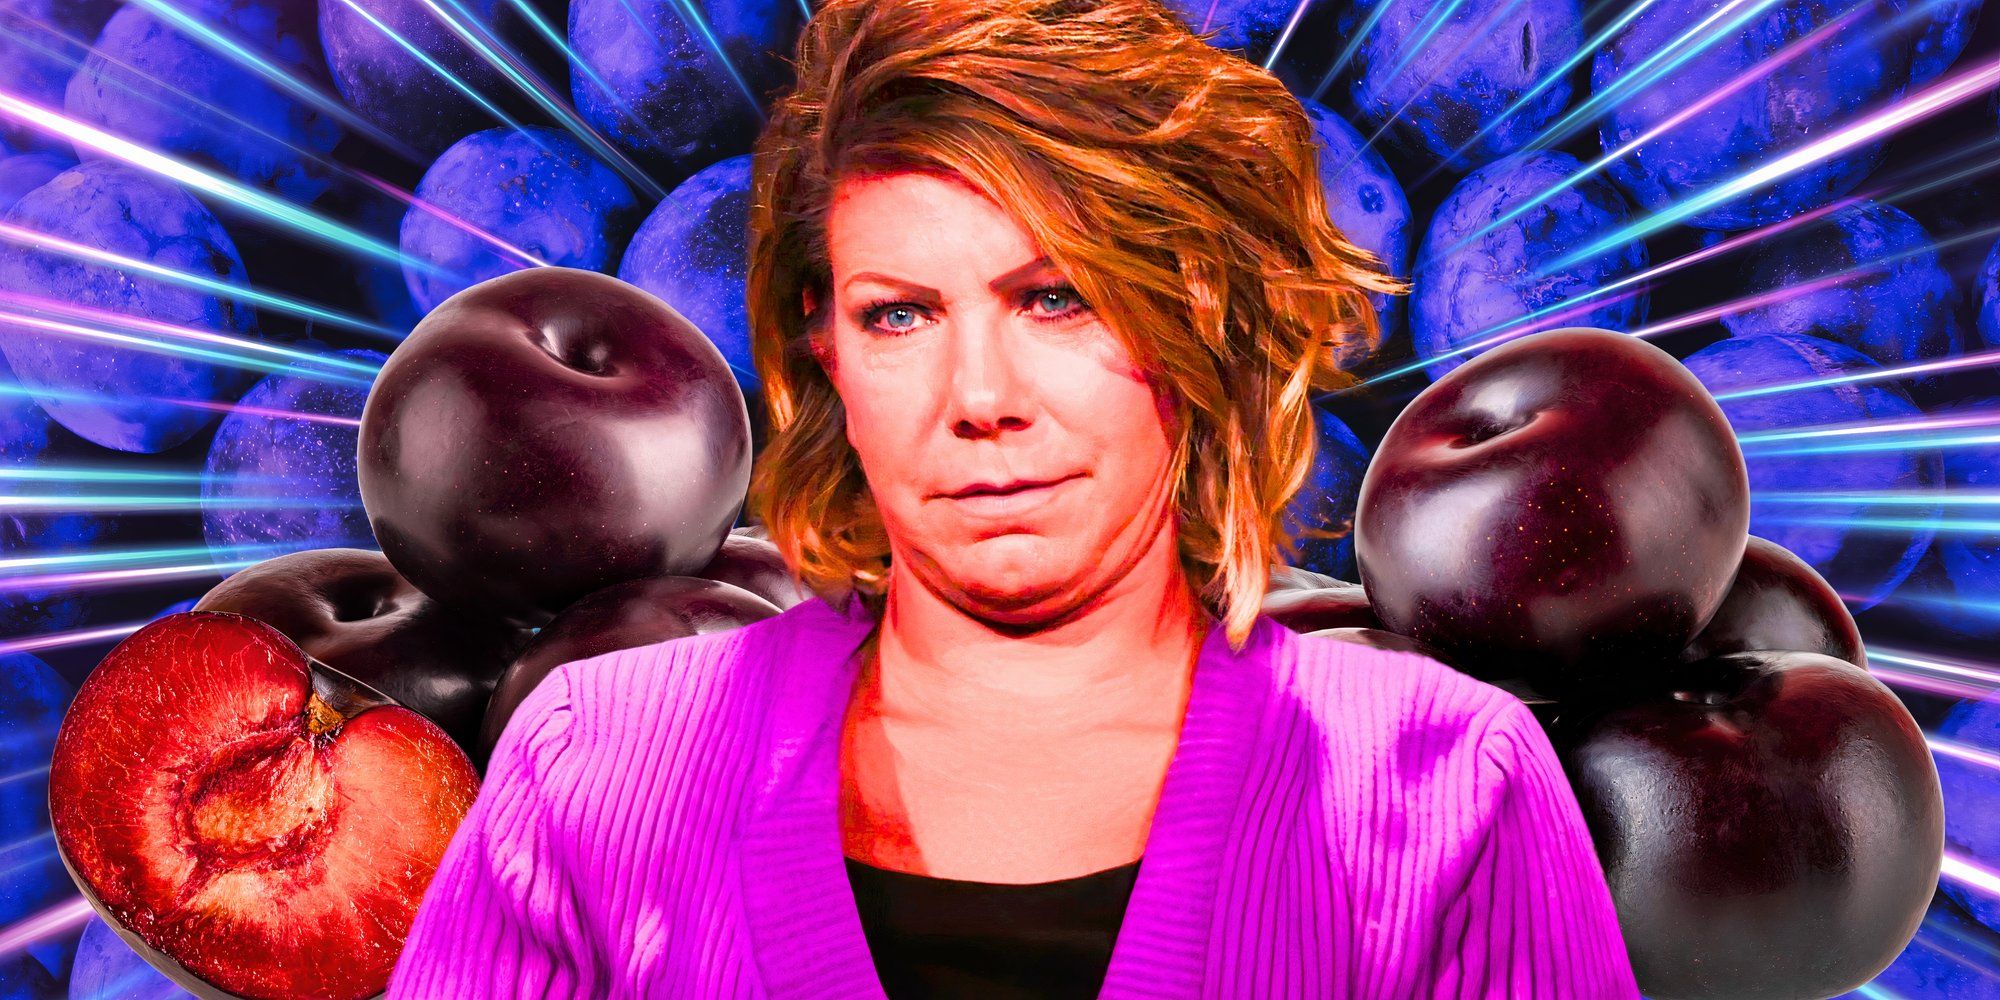 Sister Wives Meri brown montage, she's wearing plum, with a pile of plums in the background